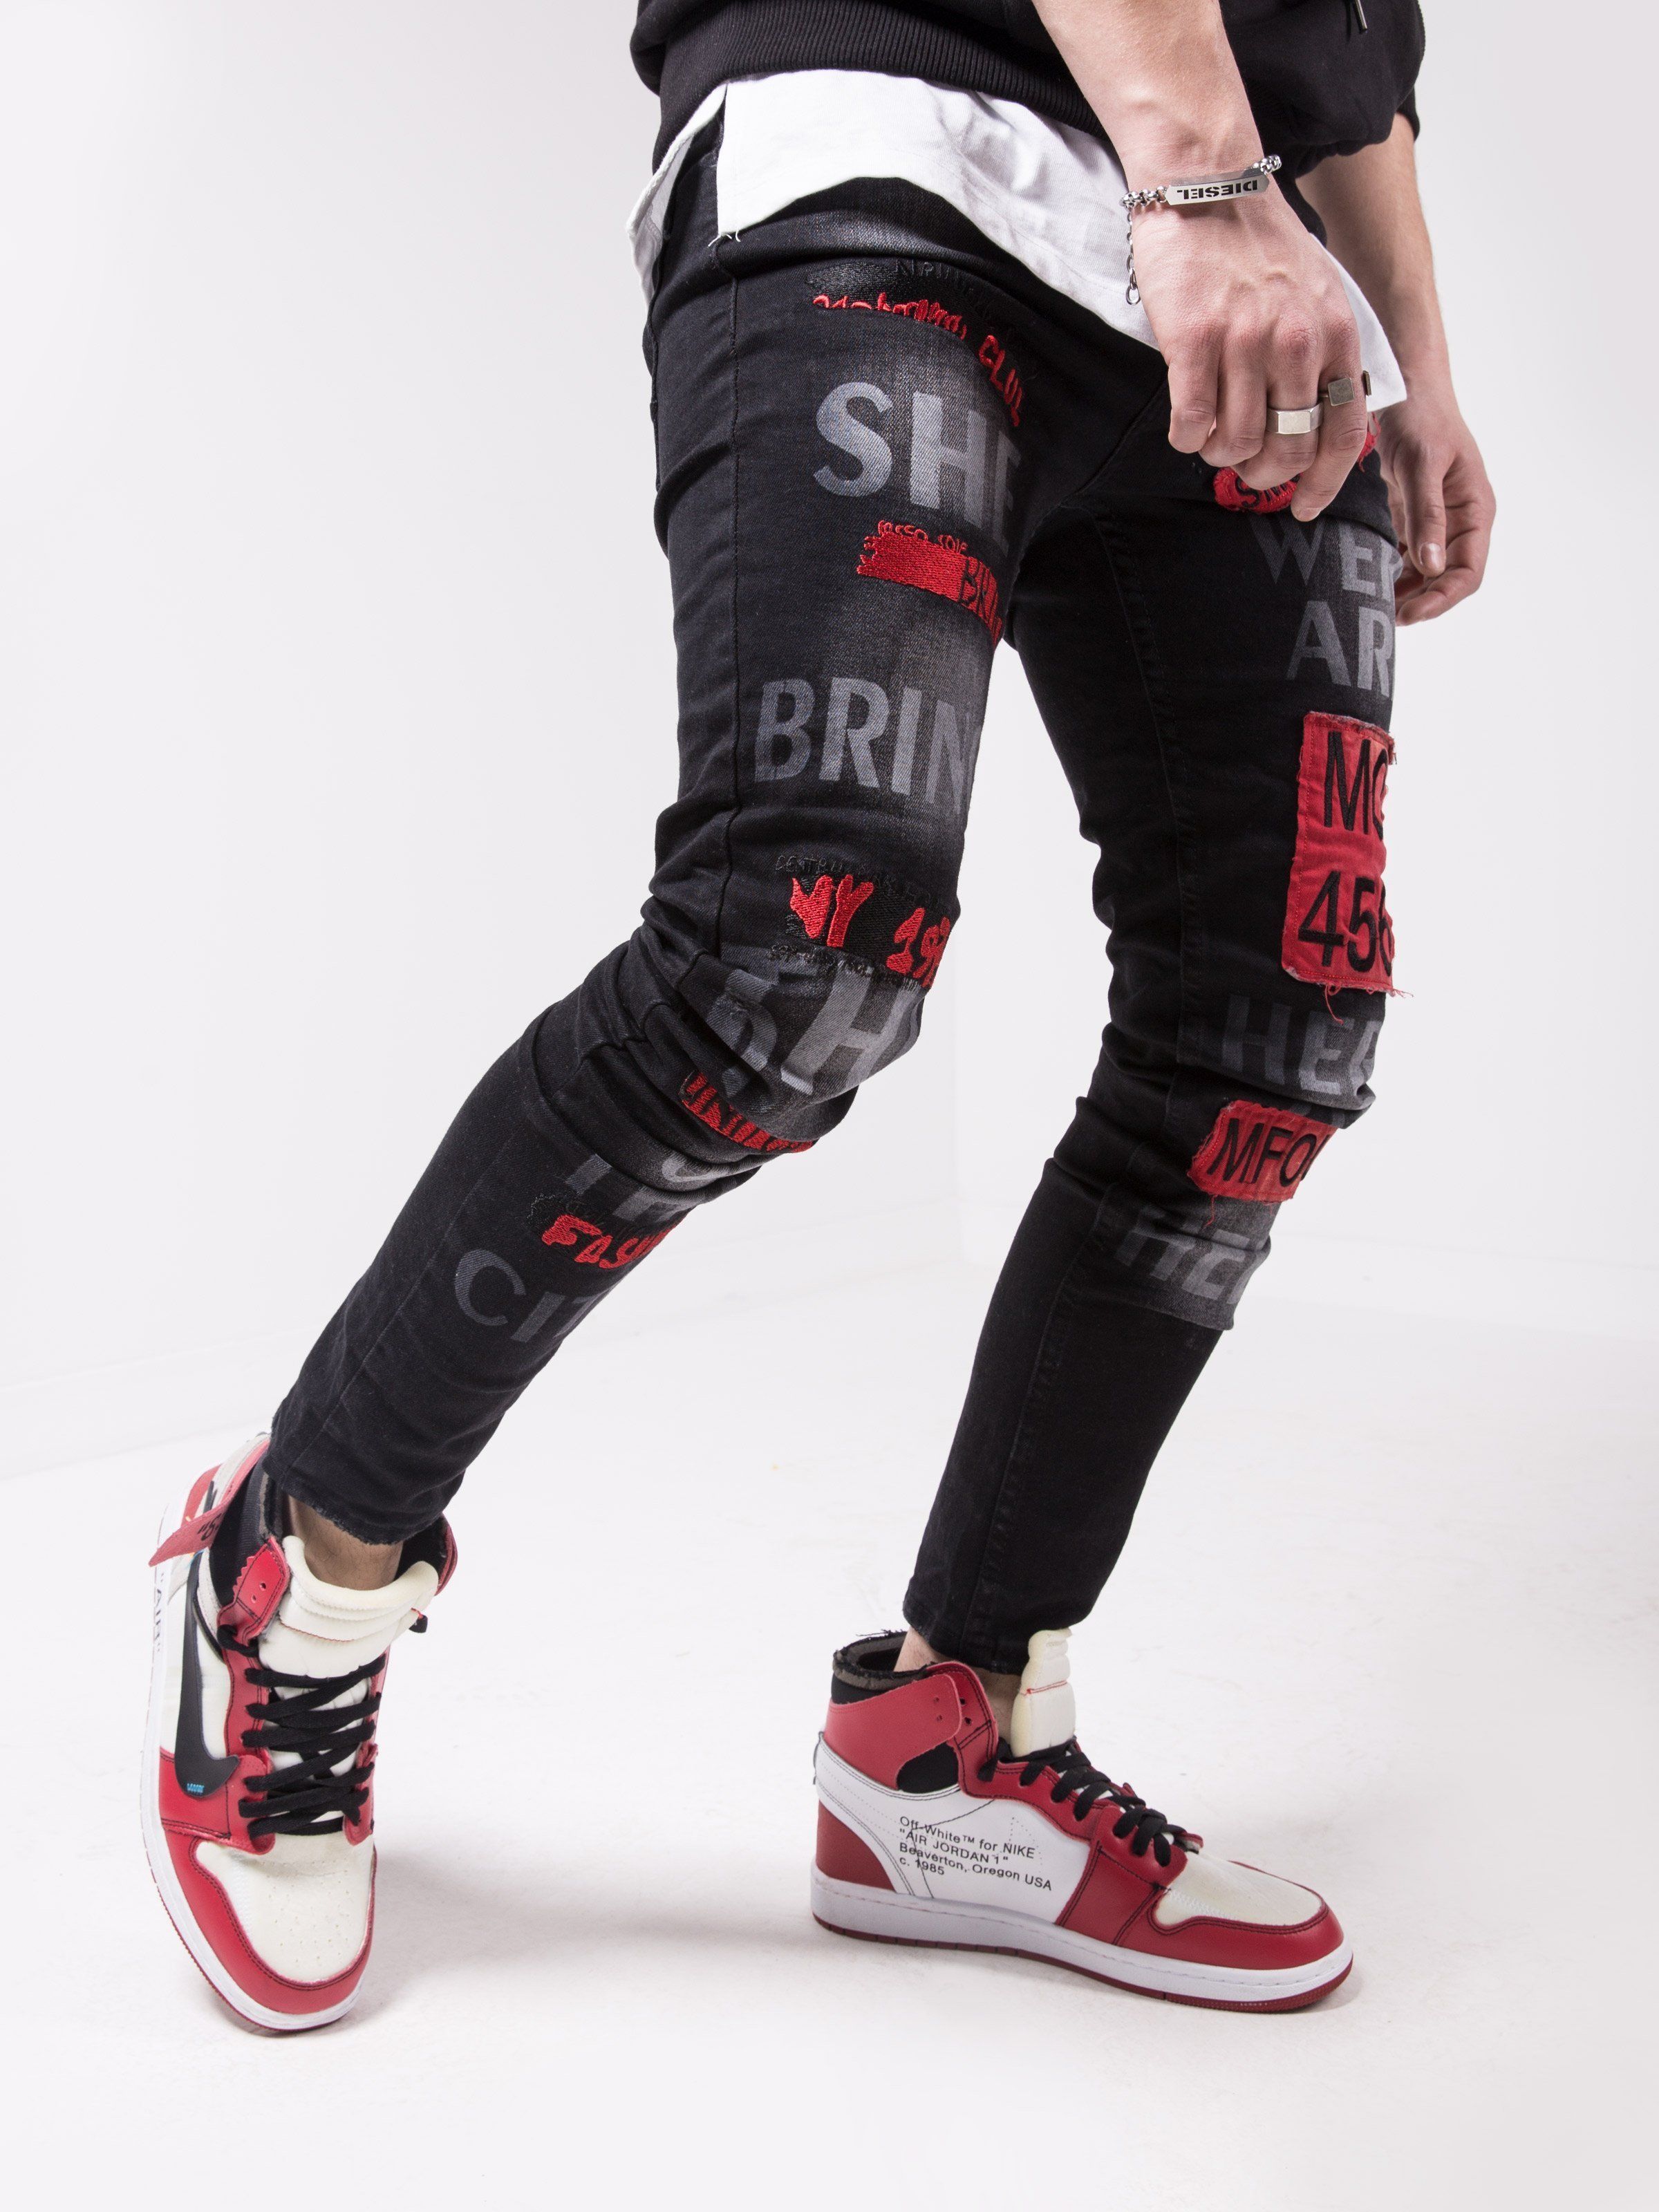 A man wearing a pair of GHETTO BIRD jeans.